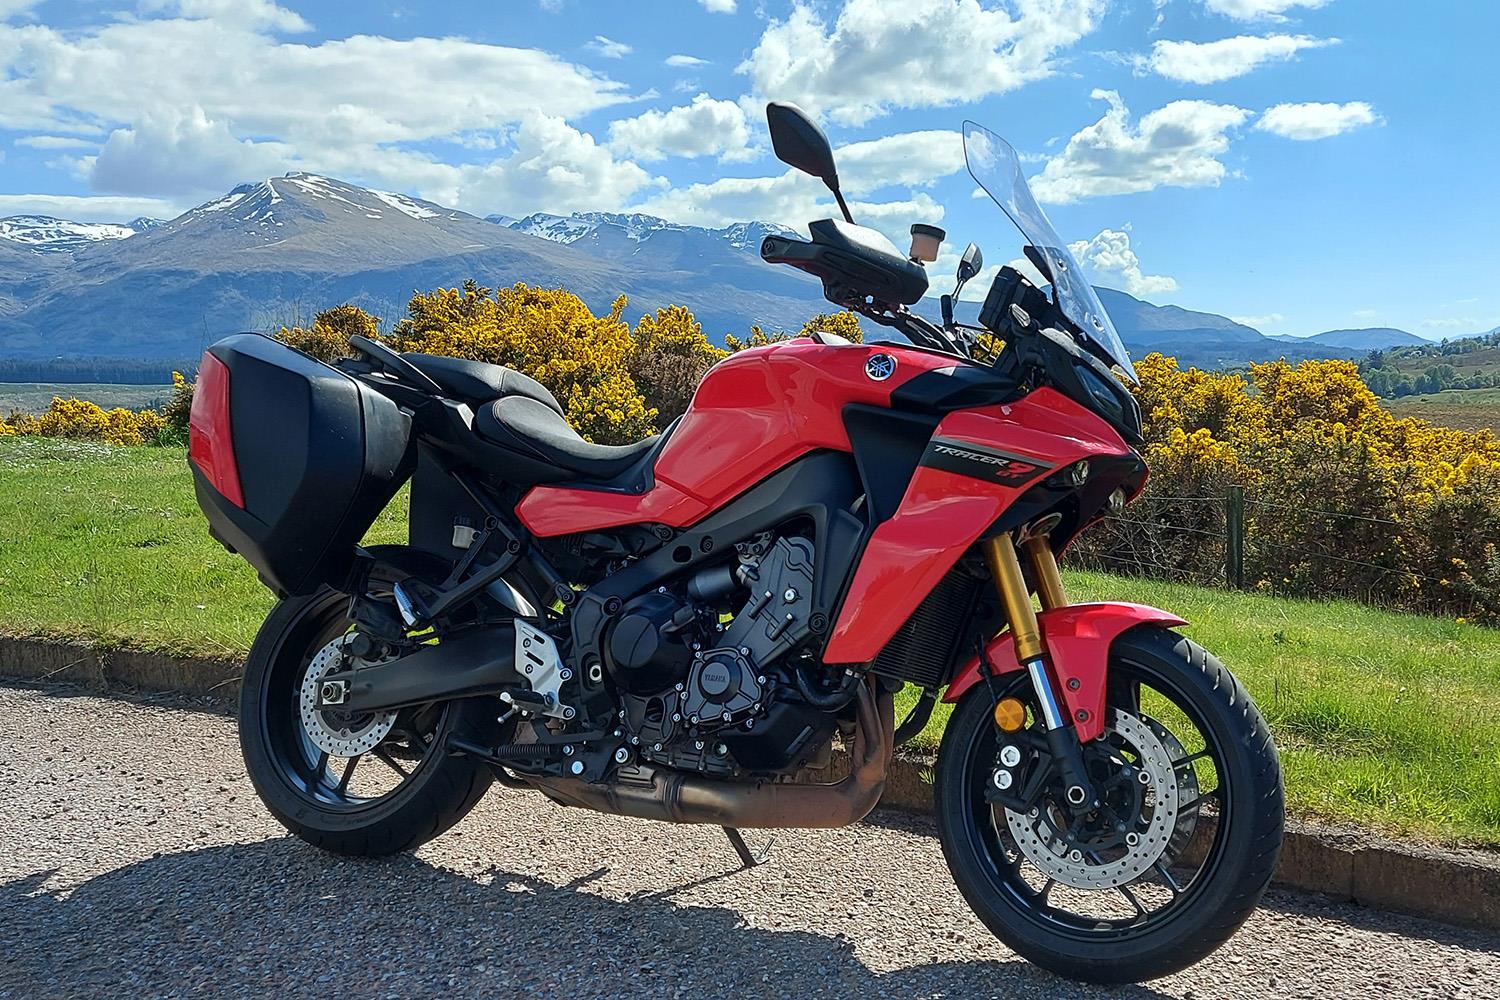 Taking the Yamaha Tracer 9 GT (2021) for a tour of Wales